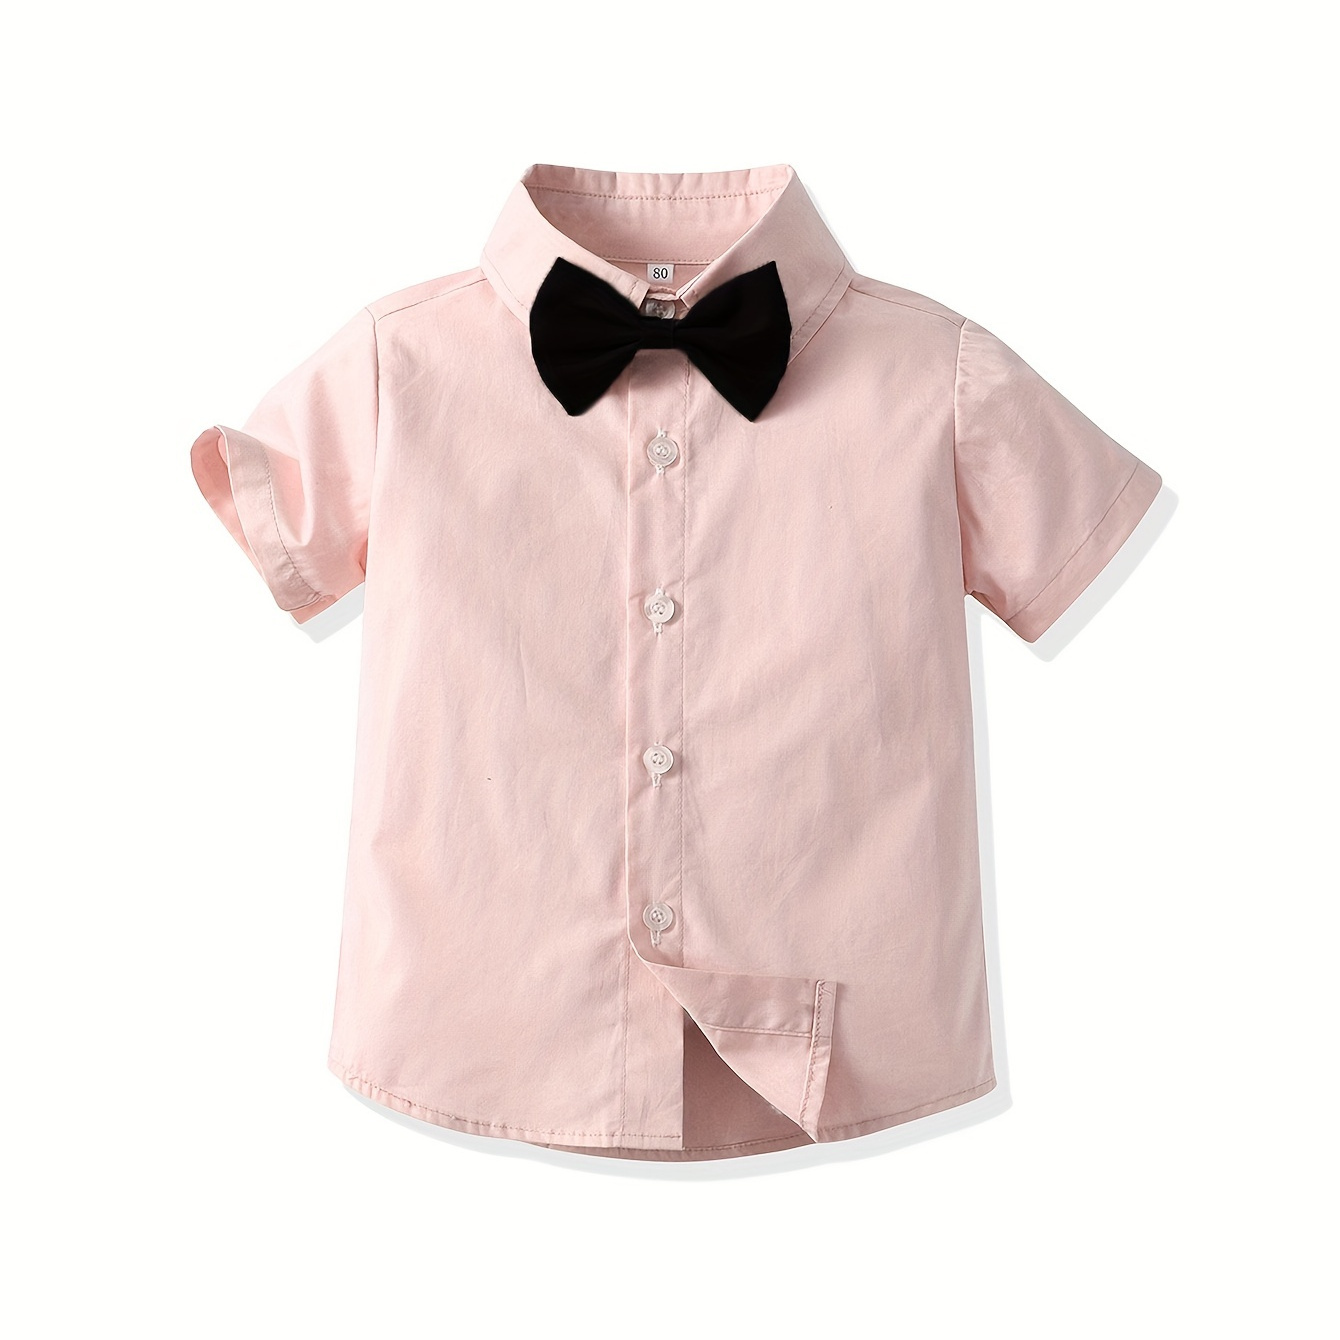 

Boy's Solid Cotton Gentleman Shirt With Bow Knot, Short Sleeve Front Button Classic Top Shirt For Party Wedding Formal Events